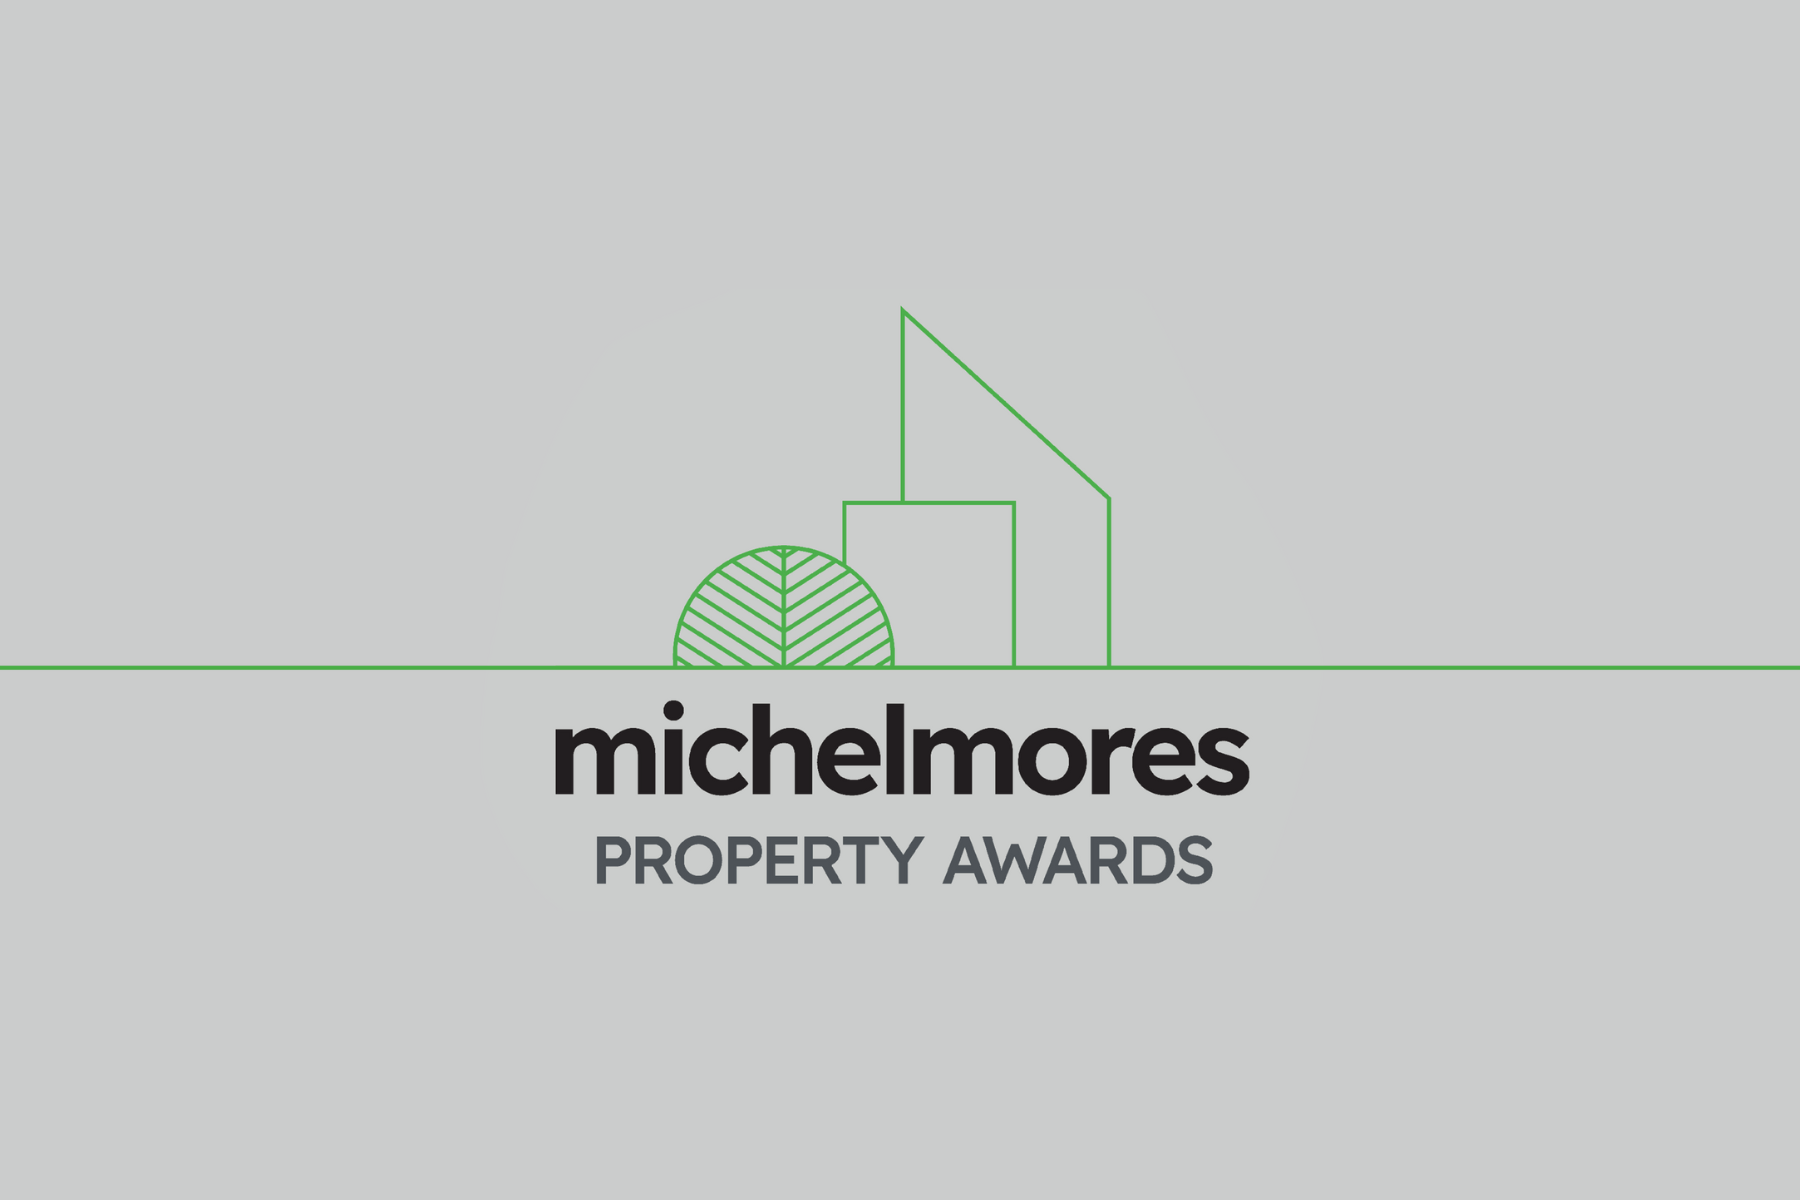 The shortlist is revealed for the 20th Michelmores Property Awards